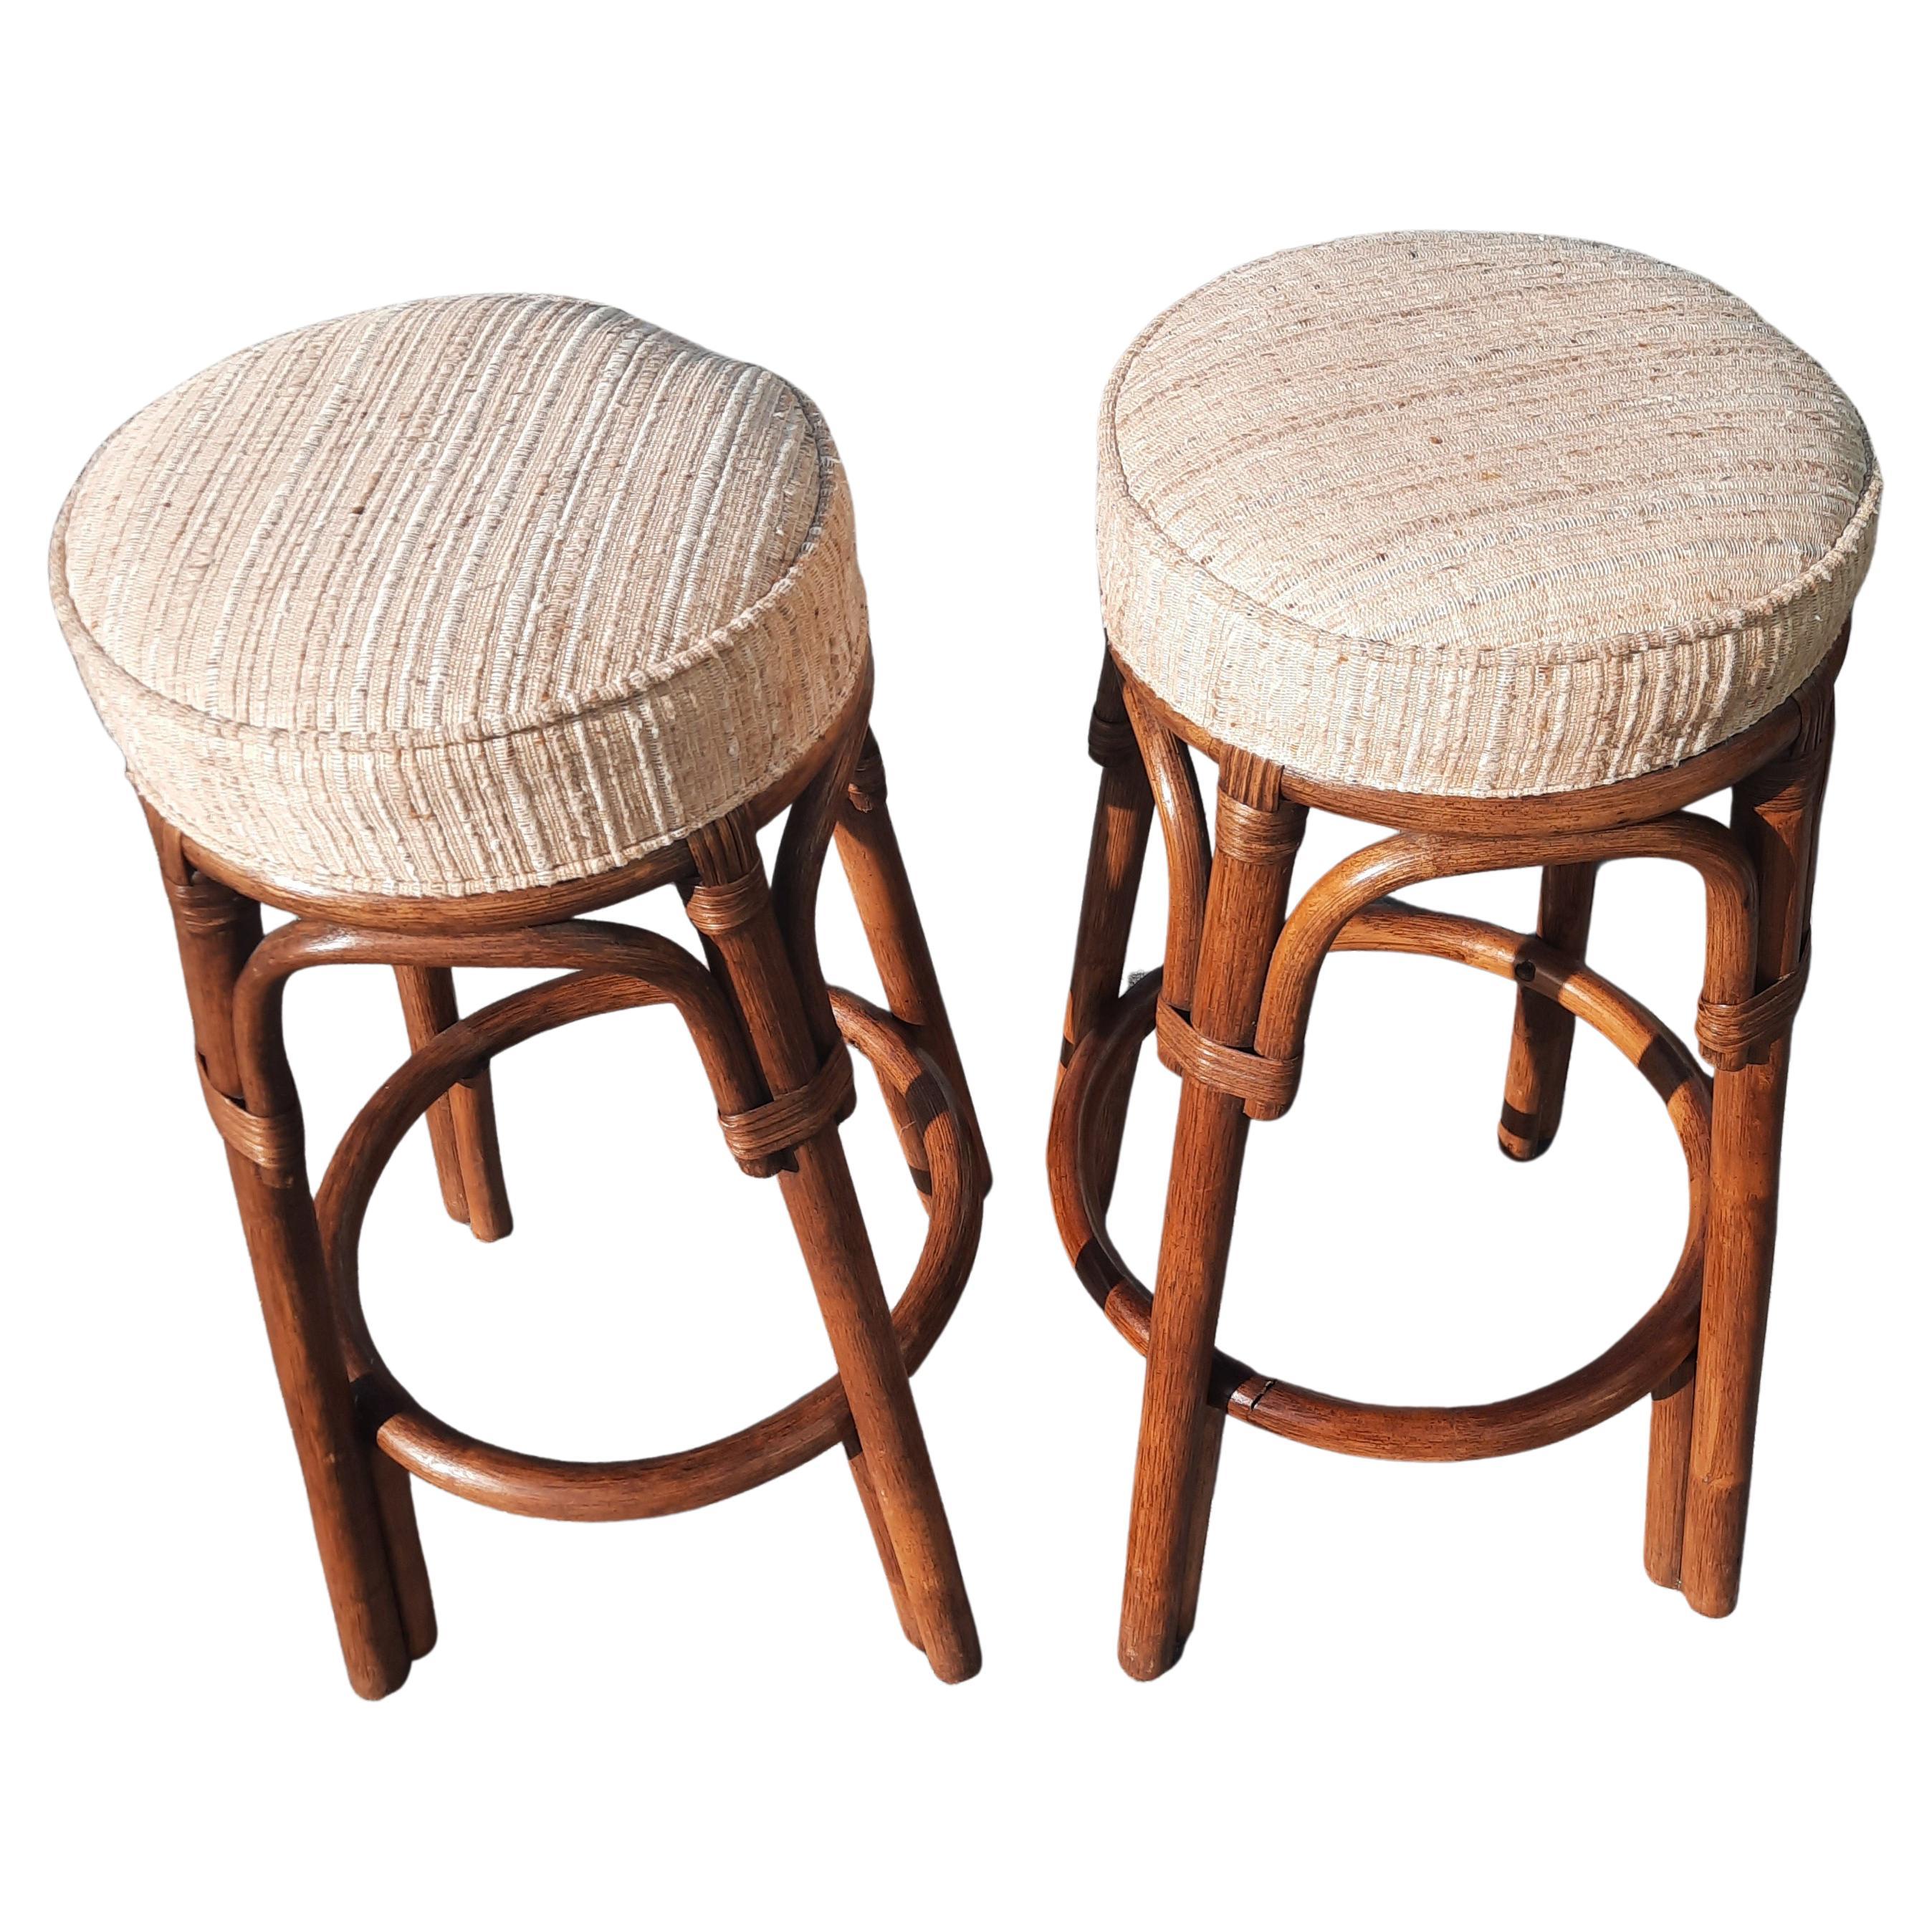 Stacked Rattan and Woven Wicker Bar and Stools Set, circa 1970s For Sale 6